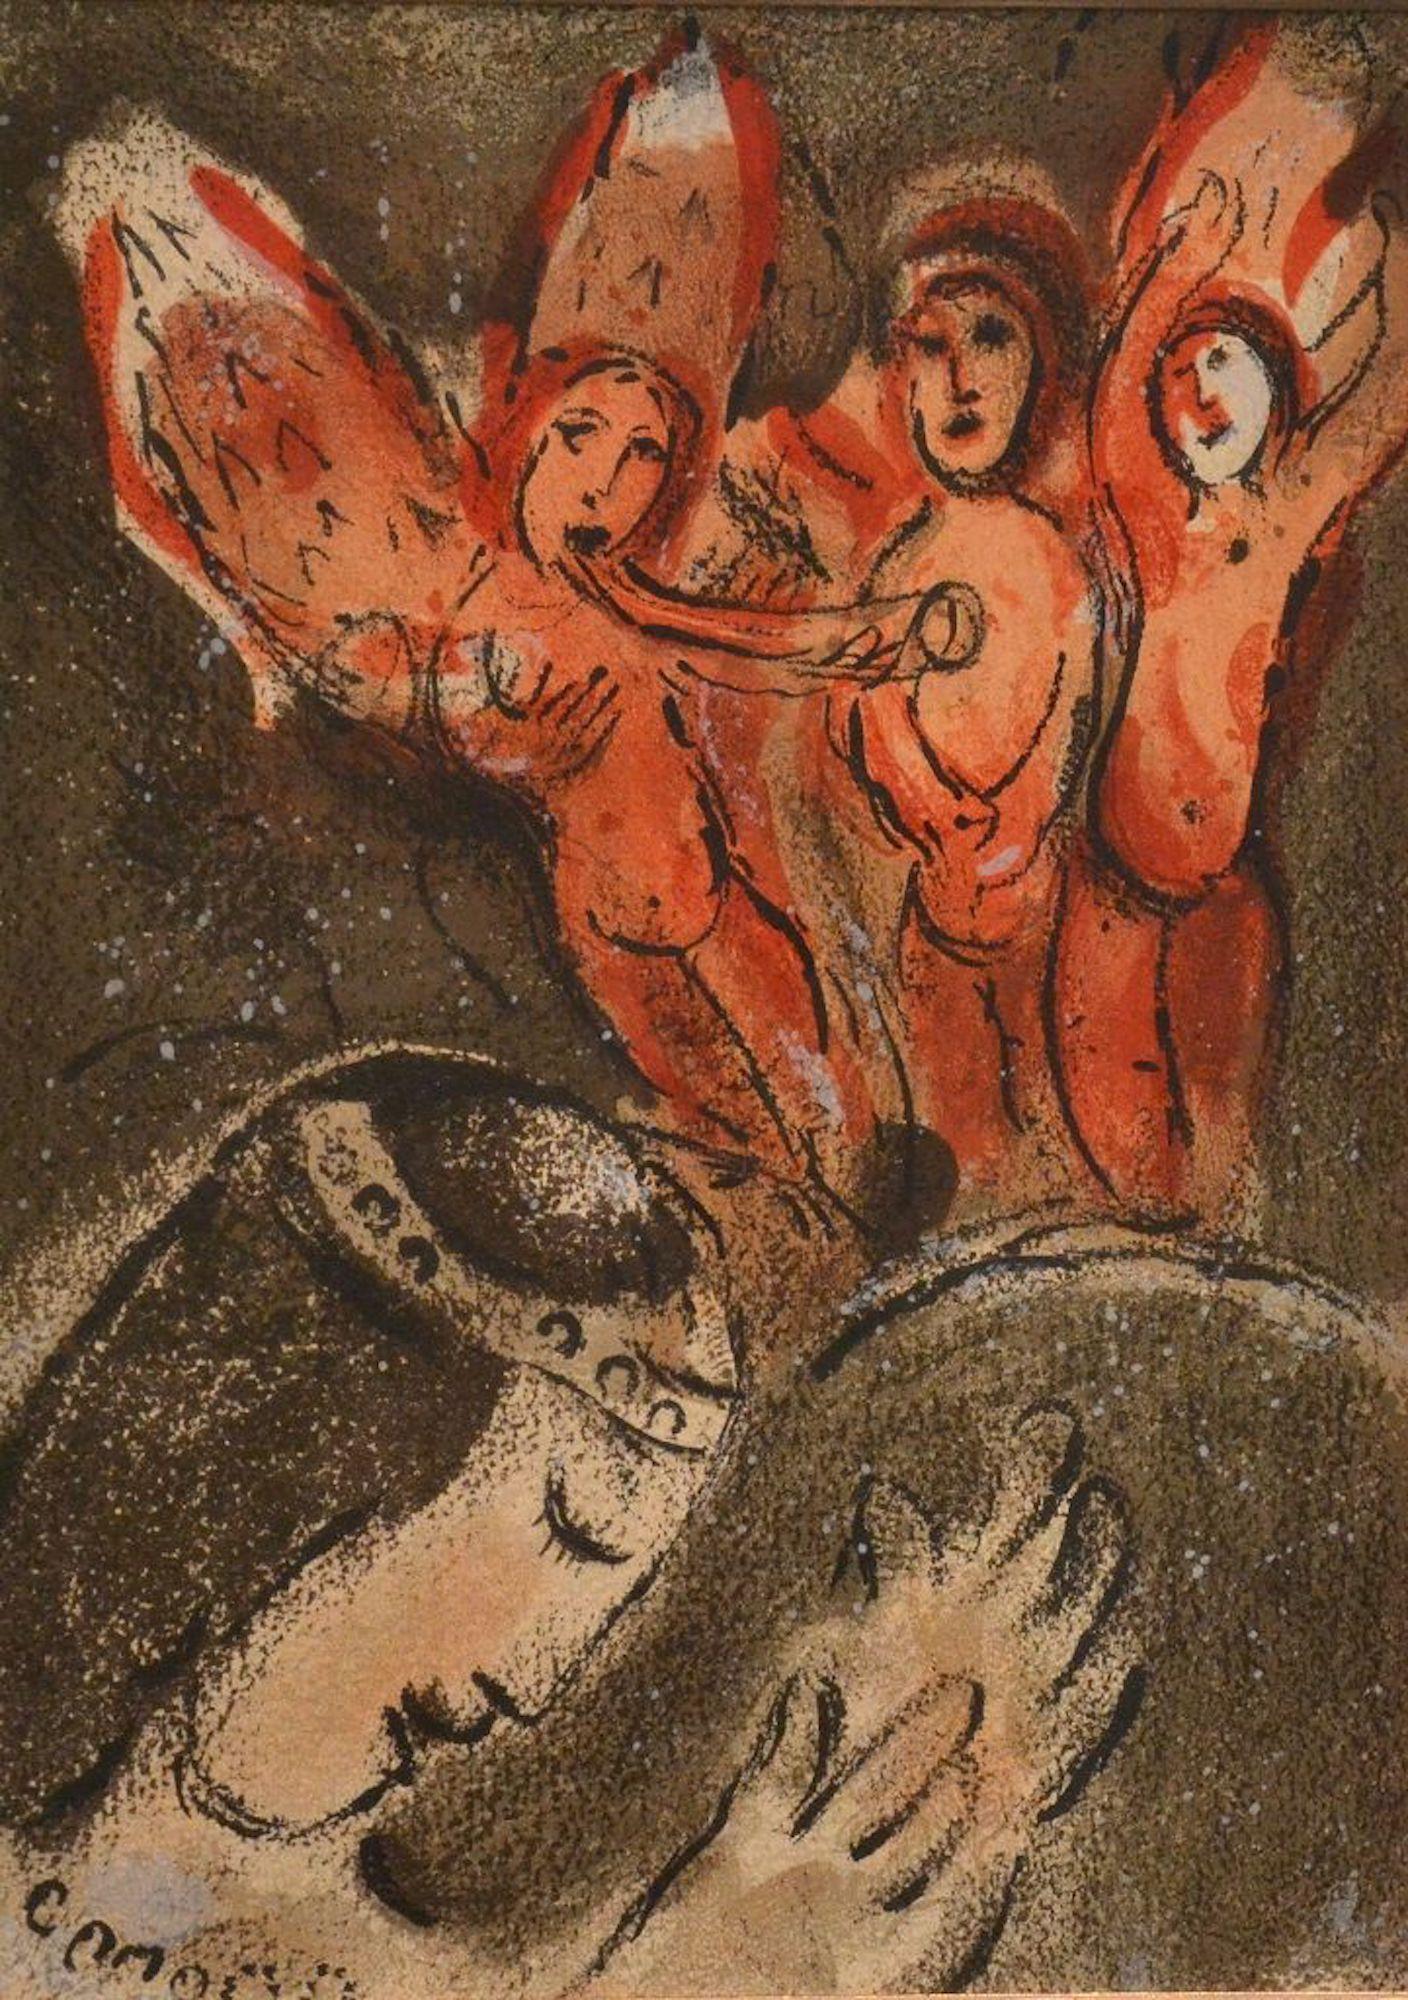 Marc Chagall Figurative Print - Sarah and the Angels - from the series "Illustrations for the Bible" -  1960